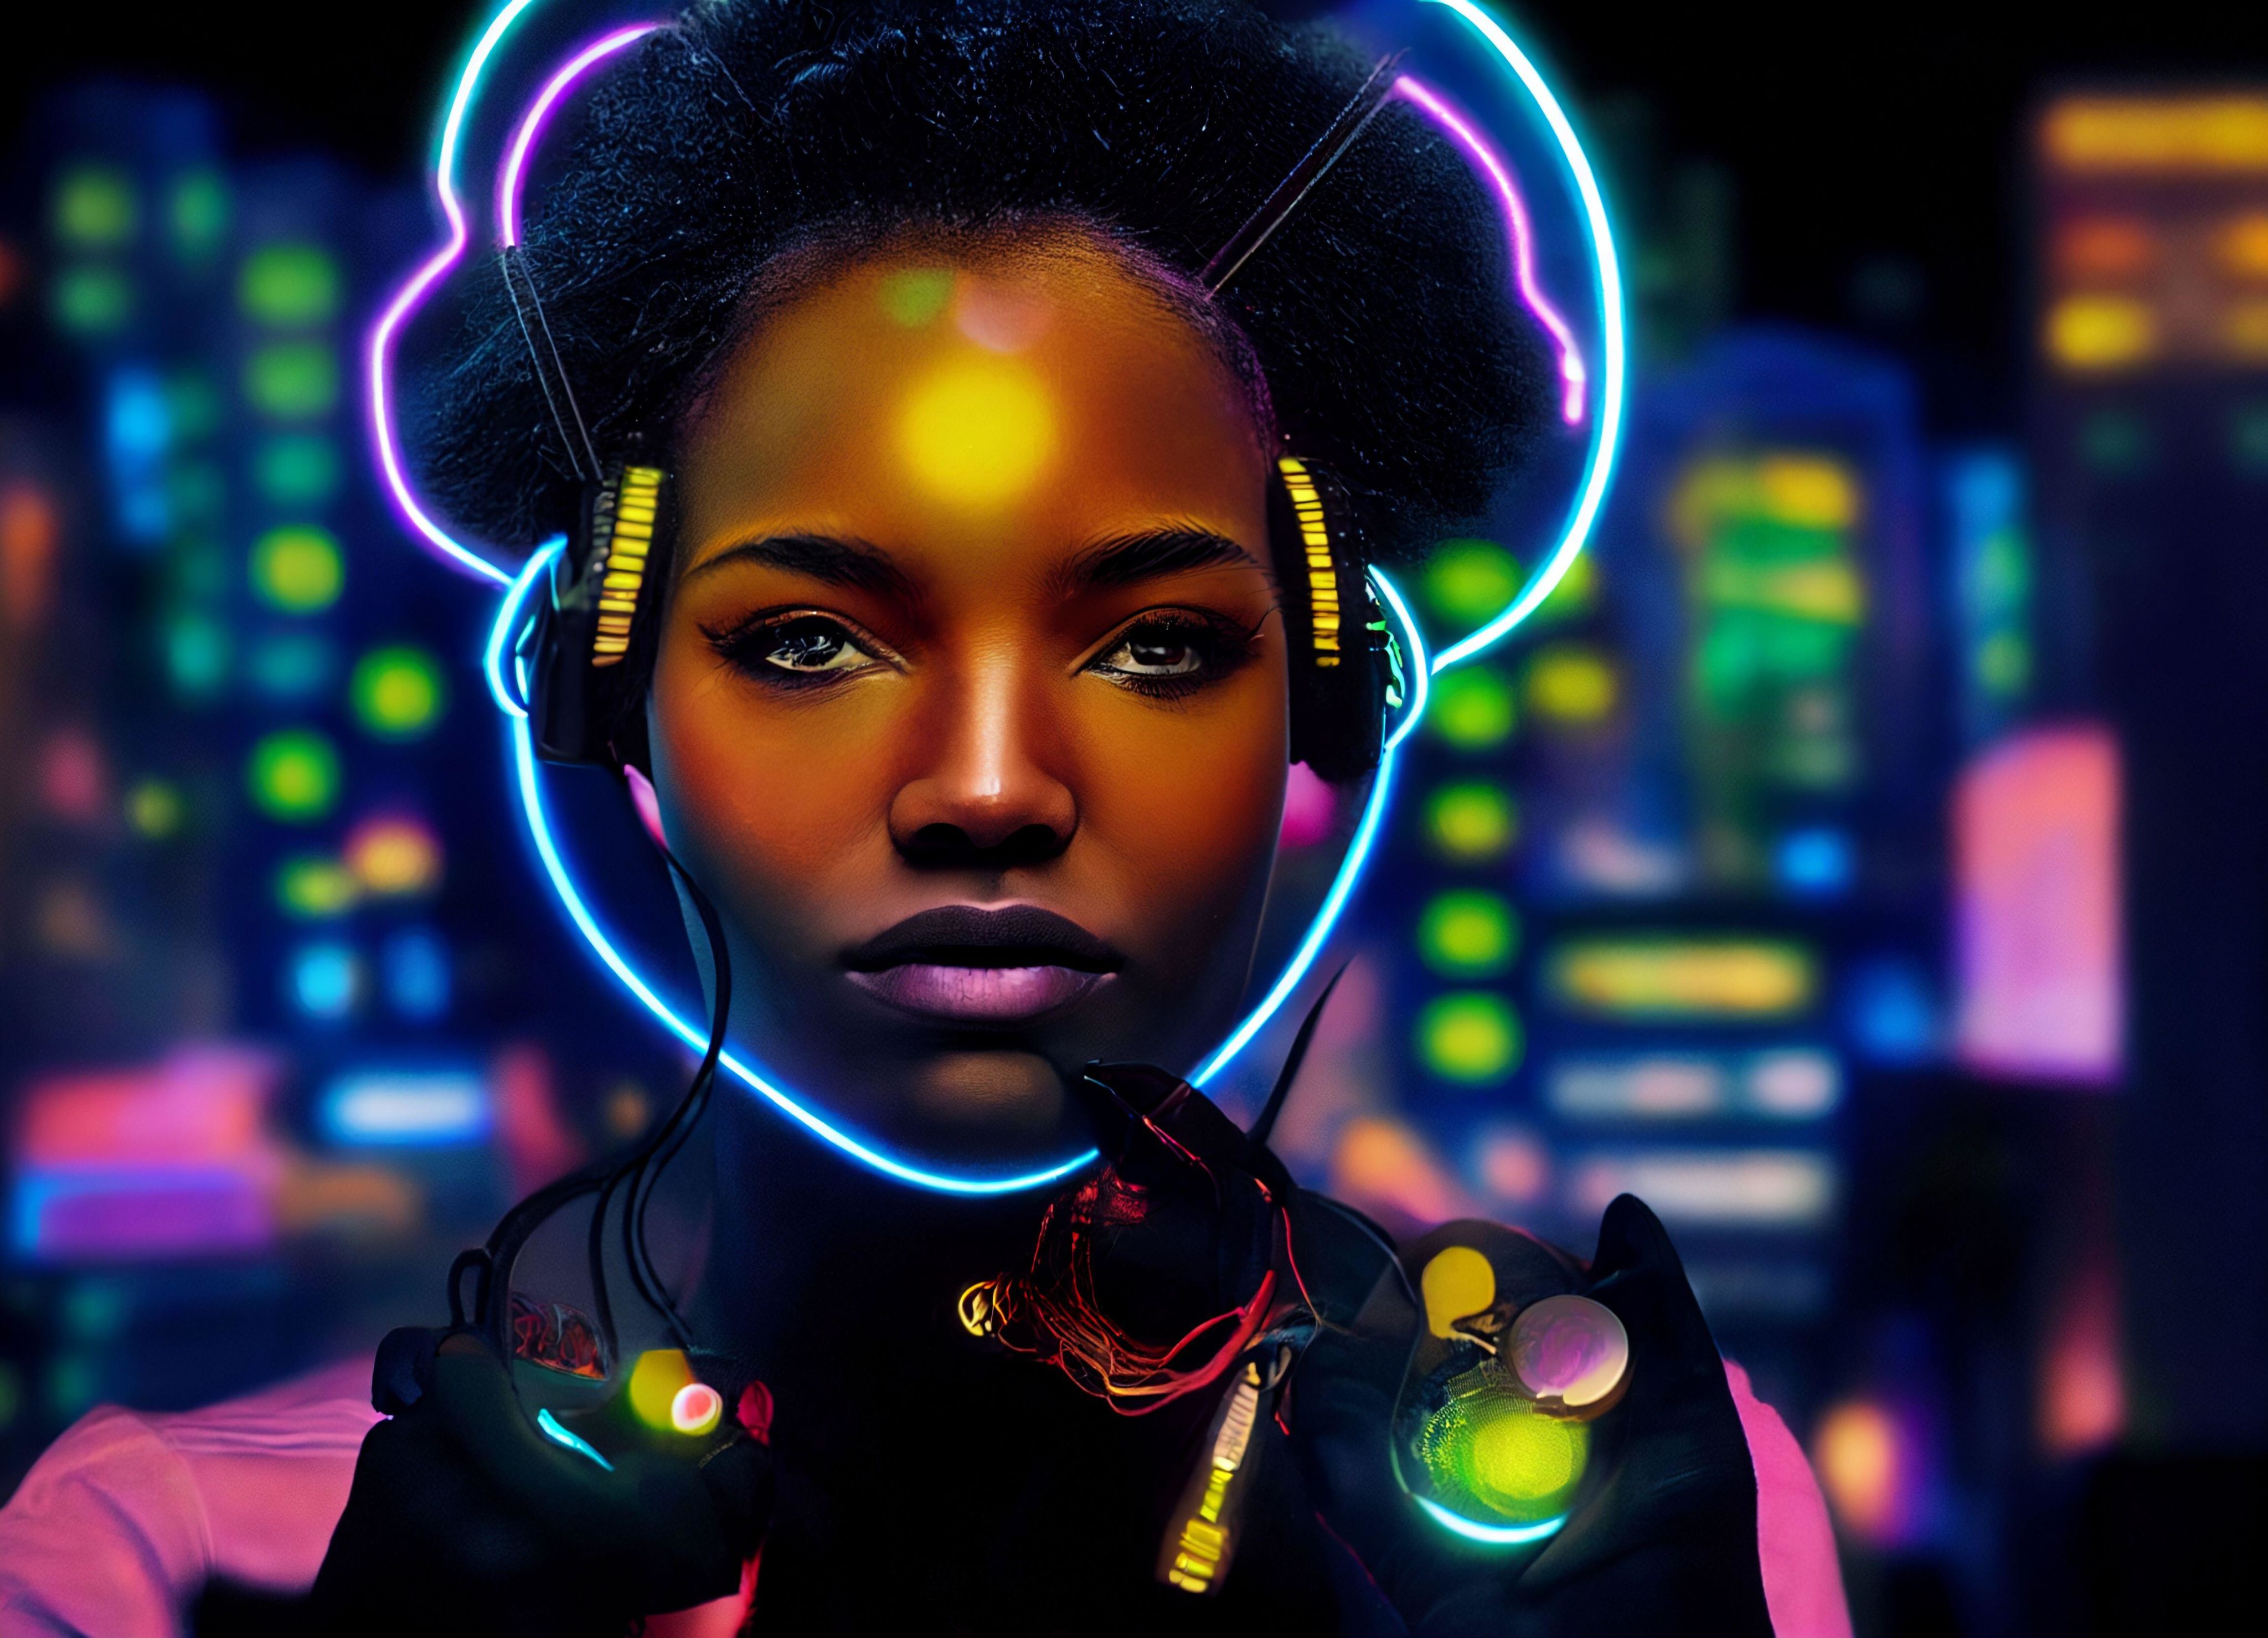 An Afrofuturism style digital illustration of a woman.